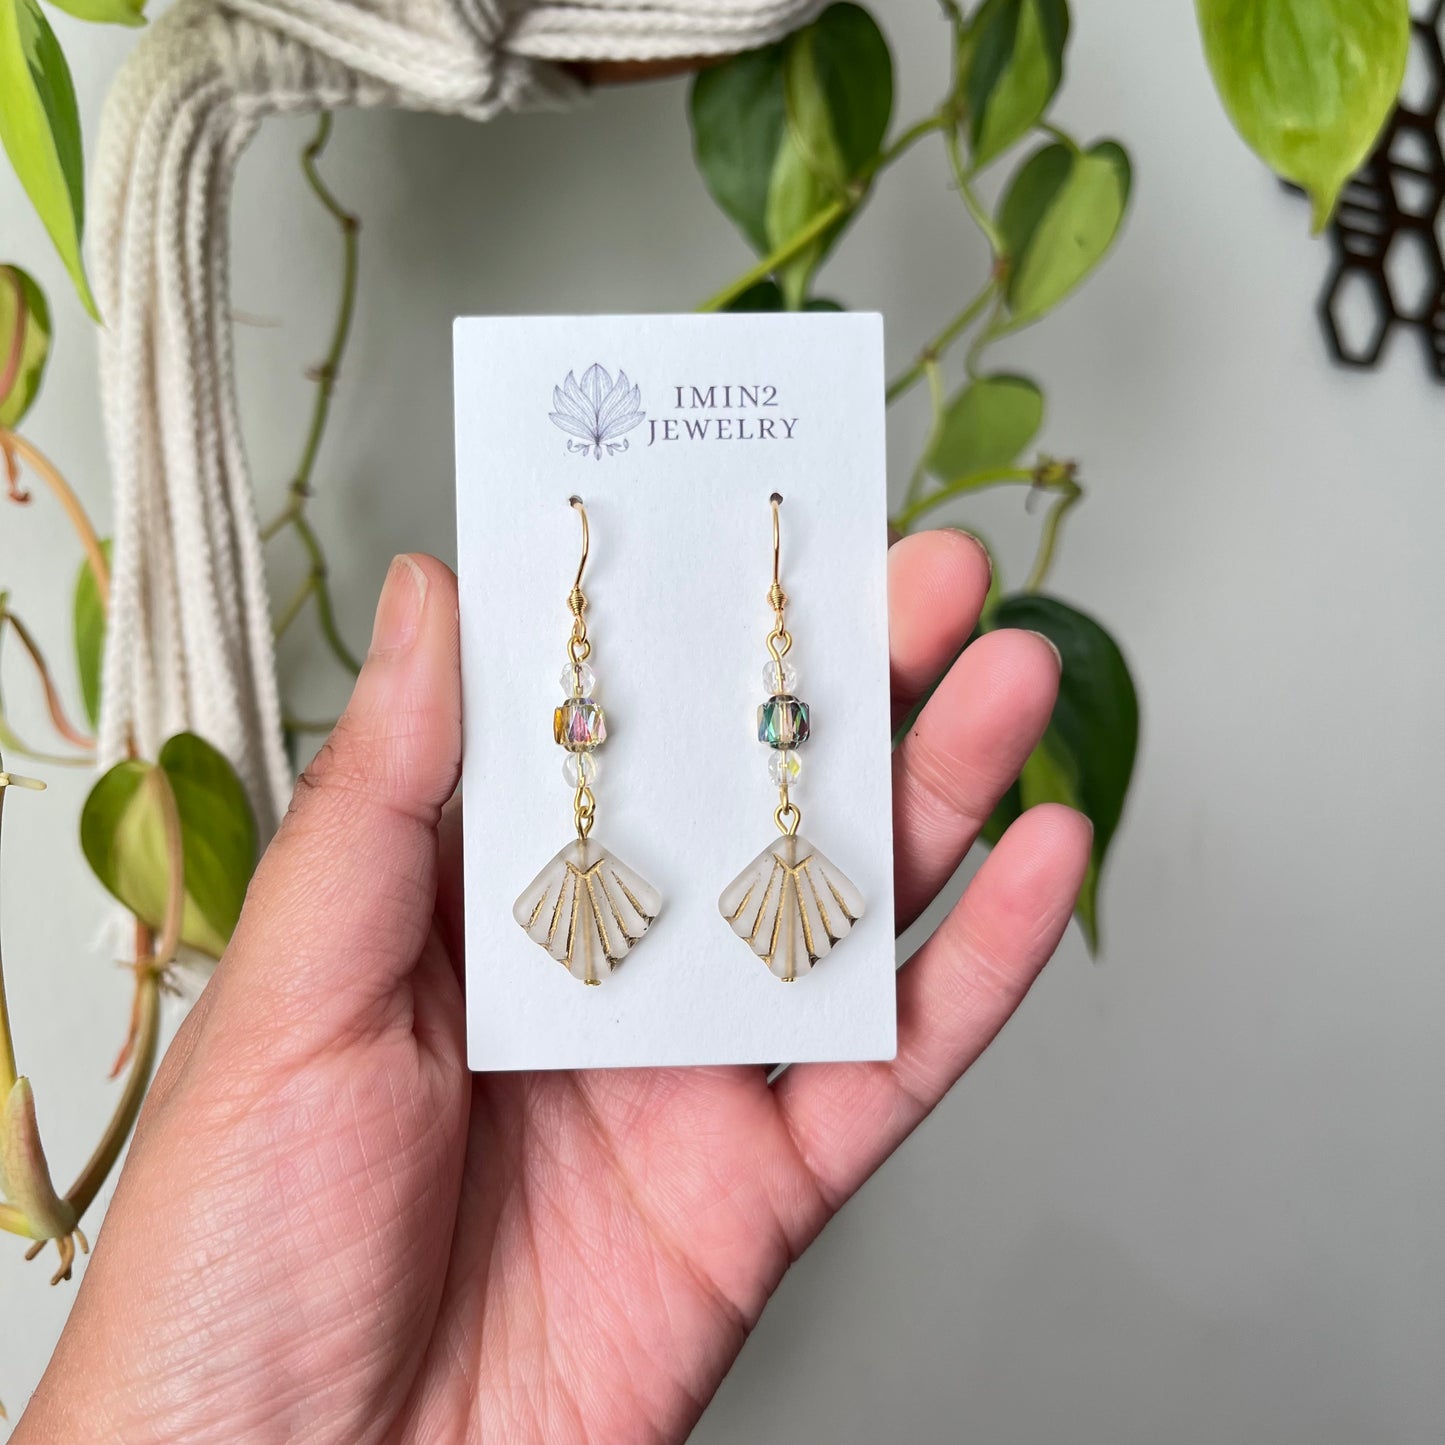 Art Deco Beaded Earrings (In two different colors)